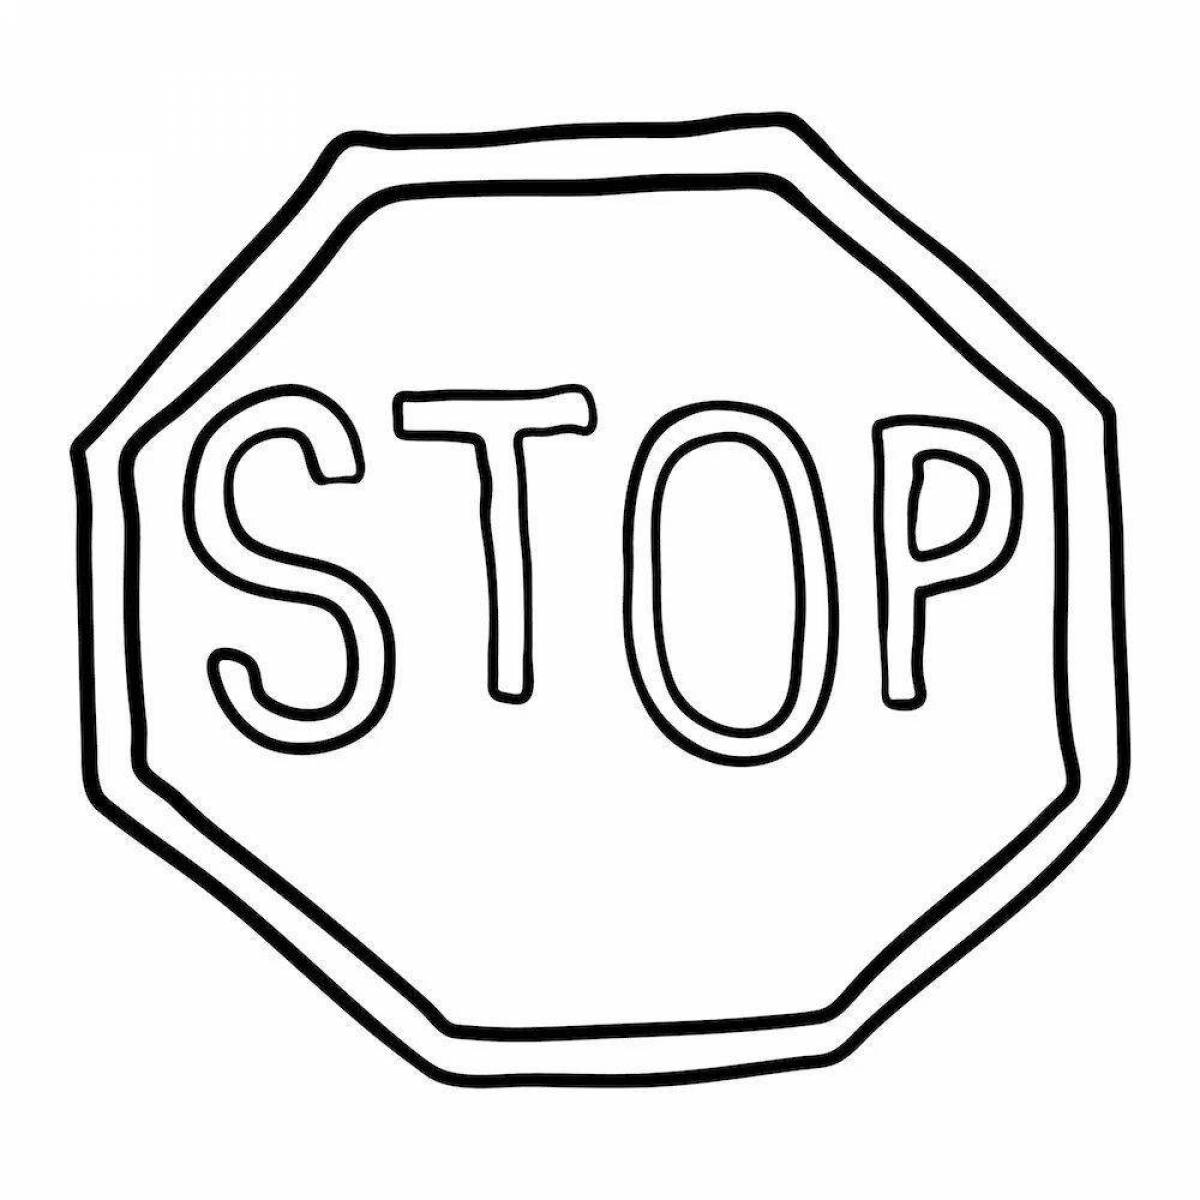 Coloring mystical stop sign